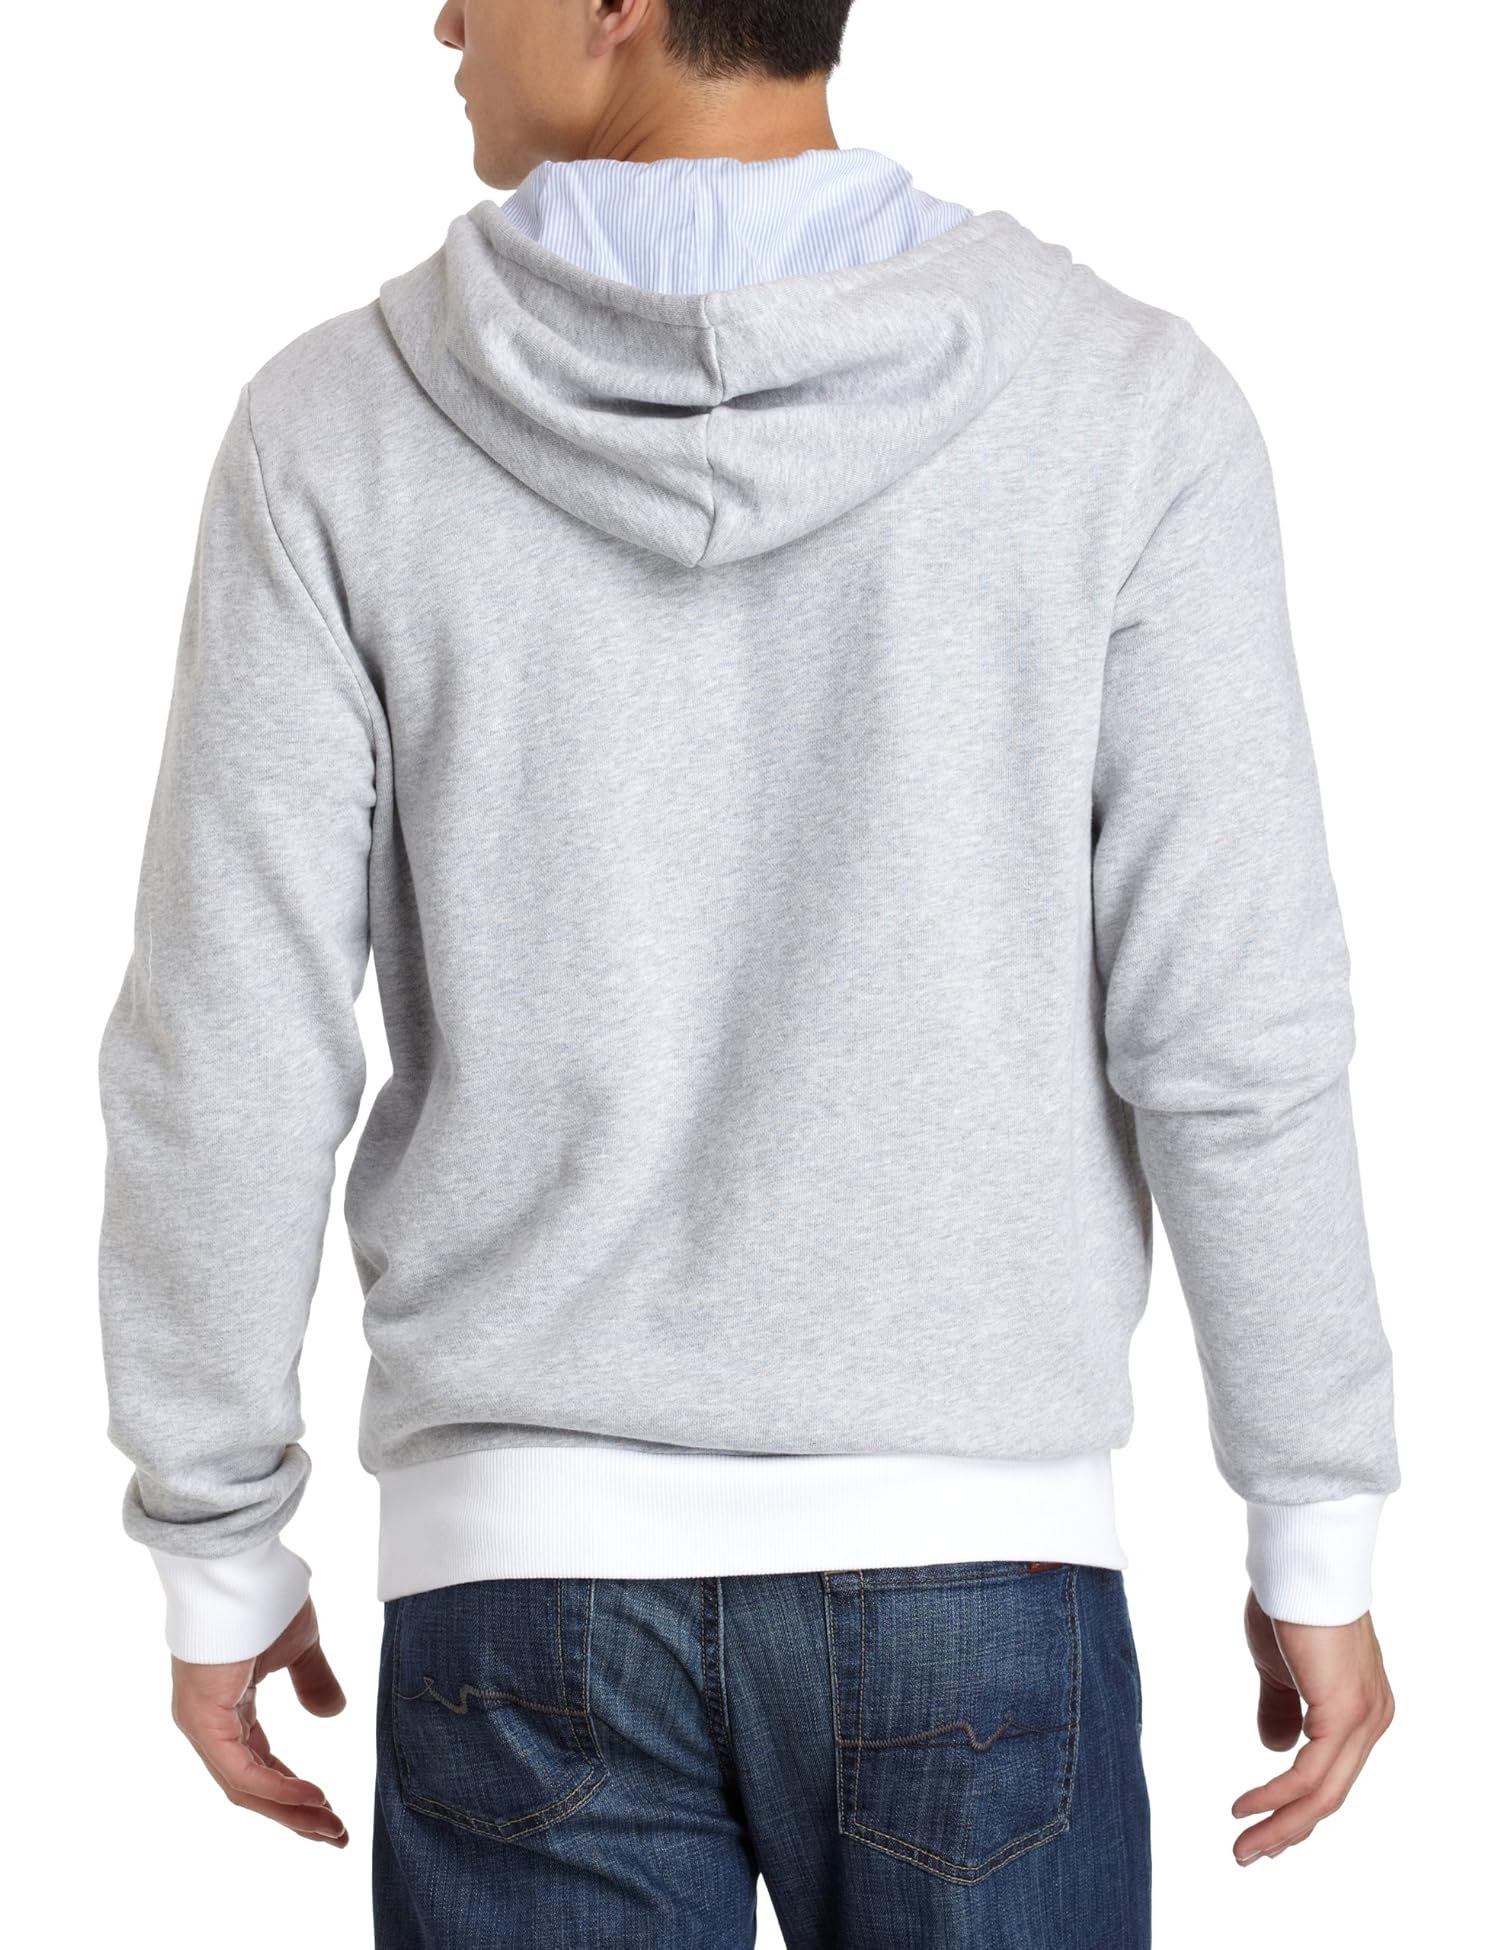 Urban Men's Guide: Trendy Hoodies for this Winter